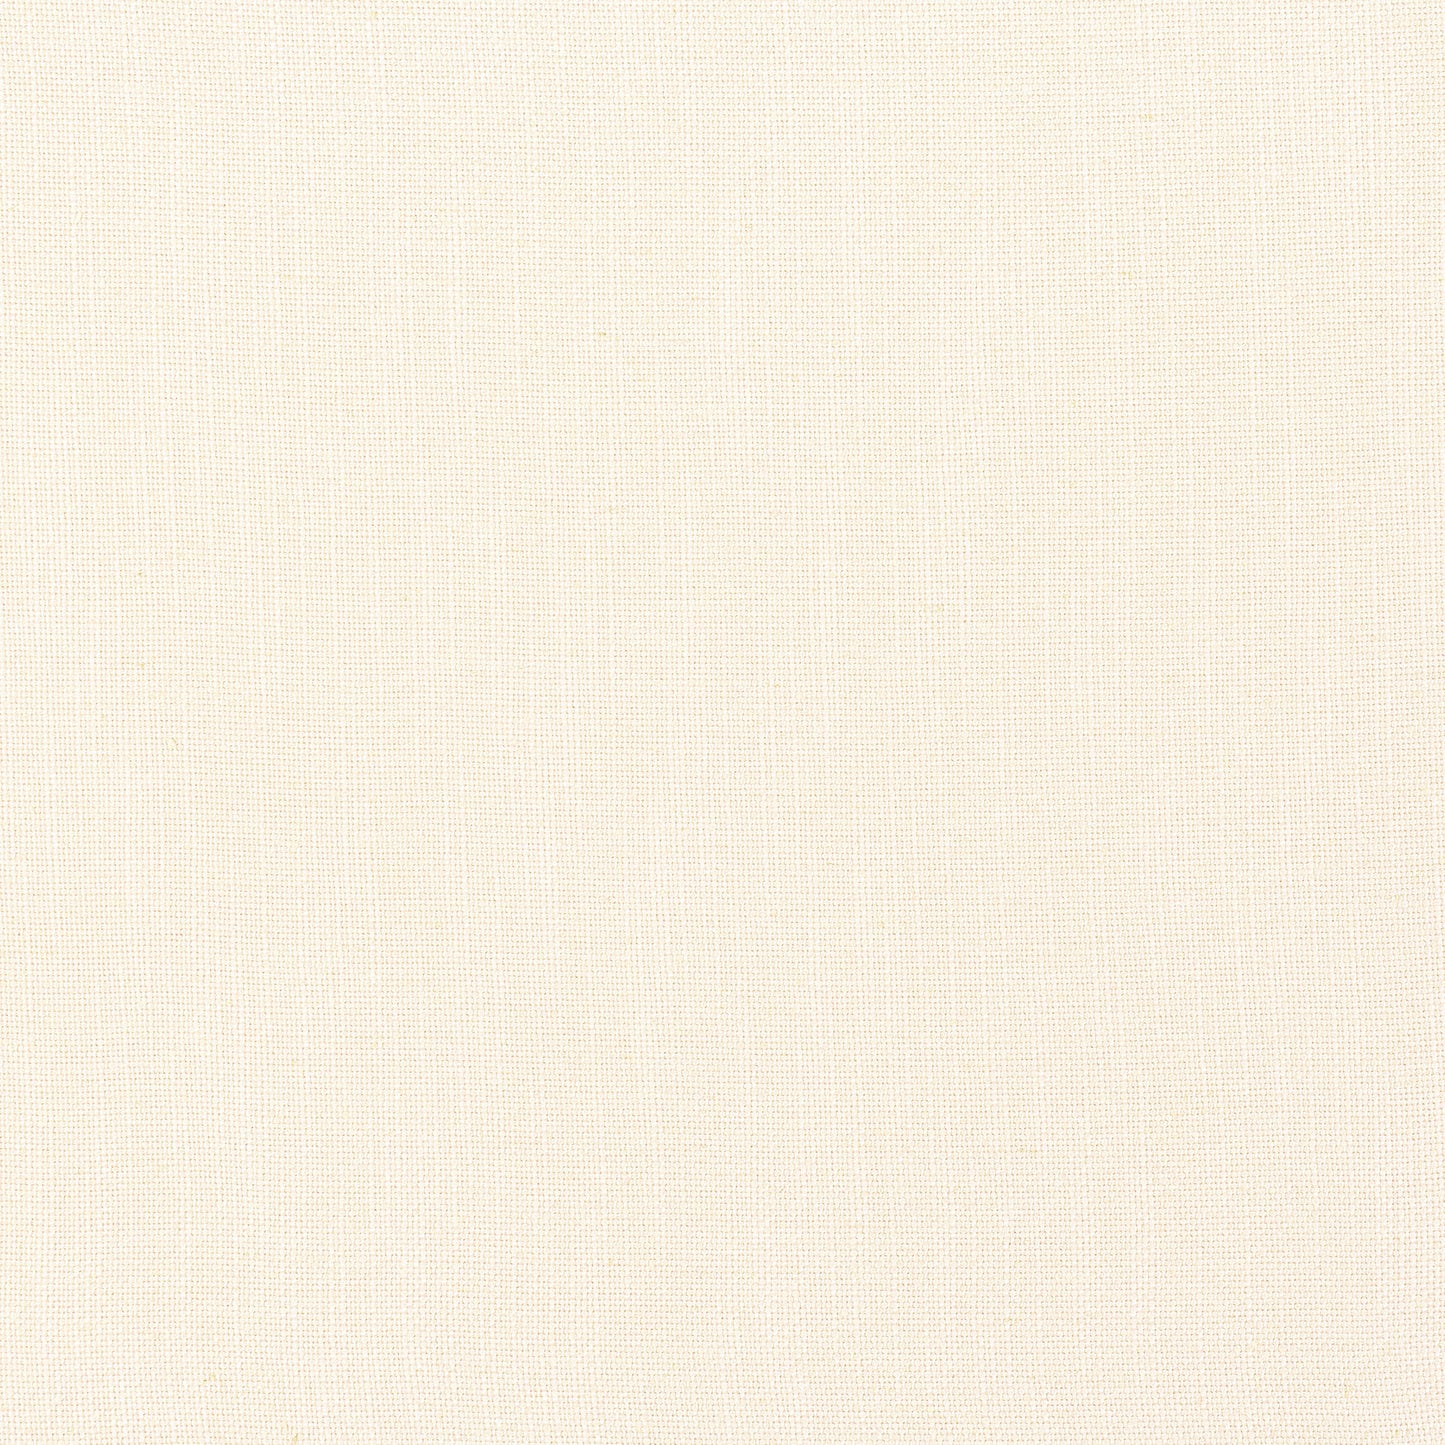 Purchase Thibaut Fabric Product FWW7625 pattern name Palisade Linen color Ivory